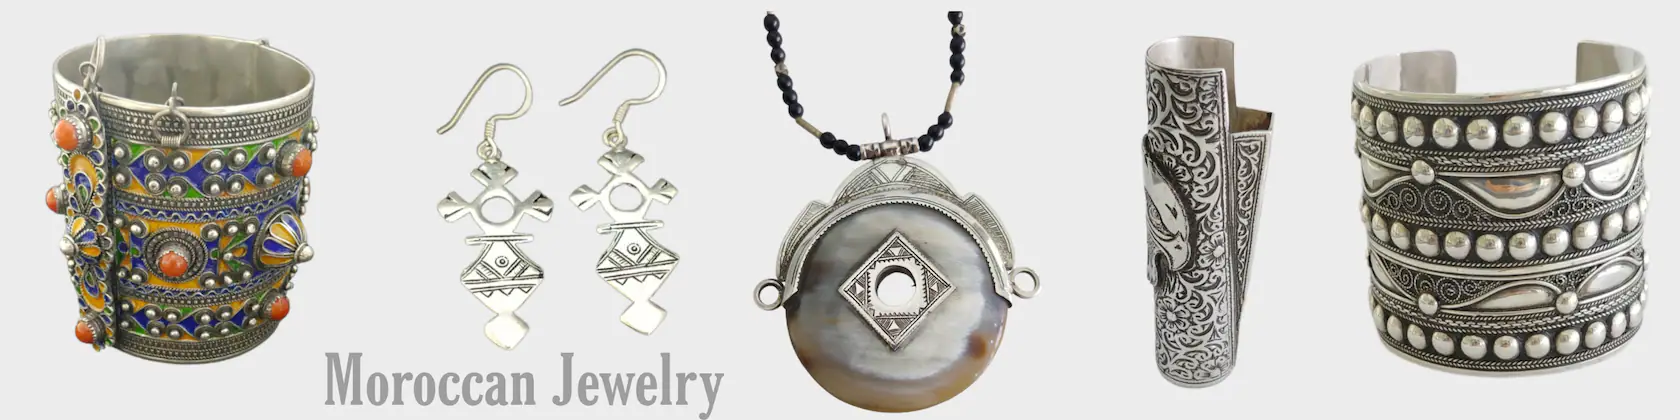 A welcome banner for Moroccan_Jewelry